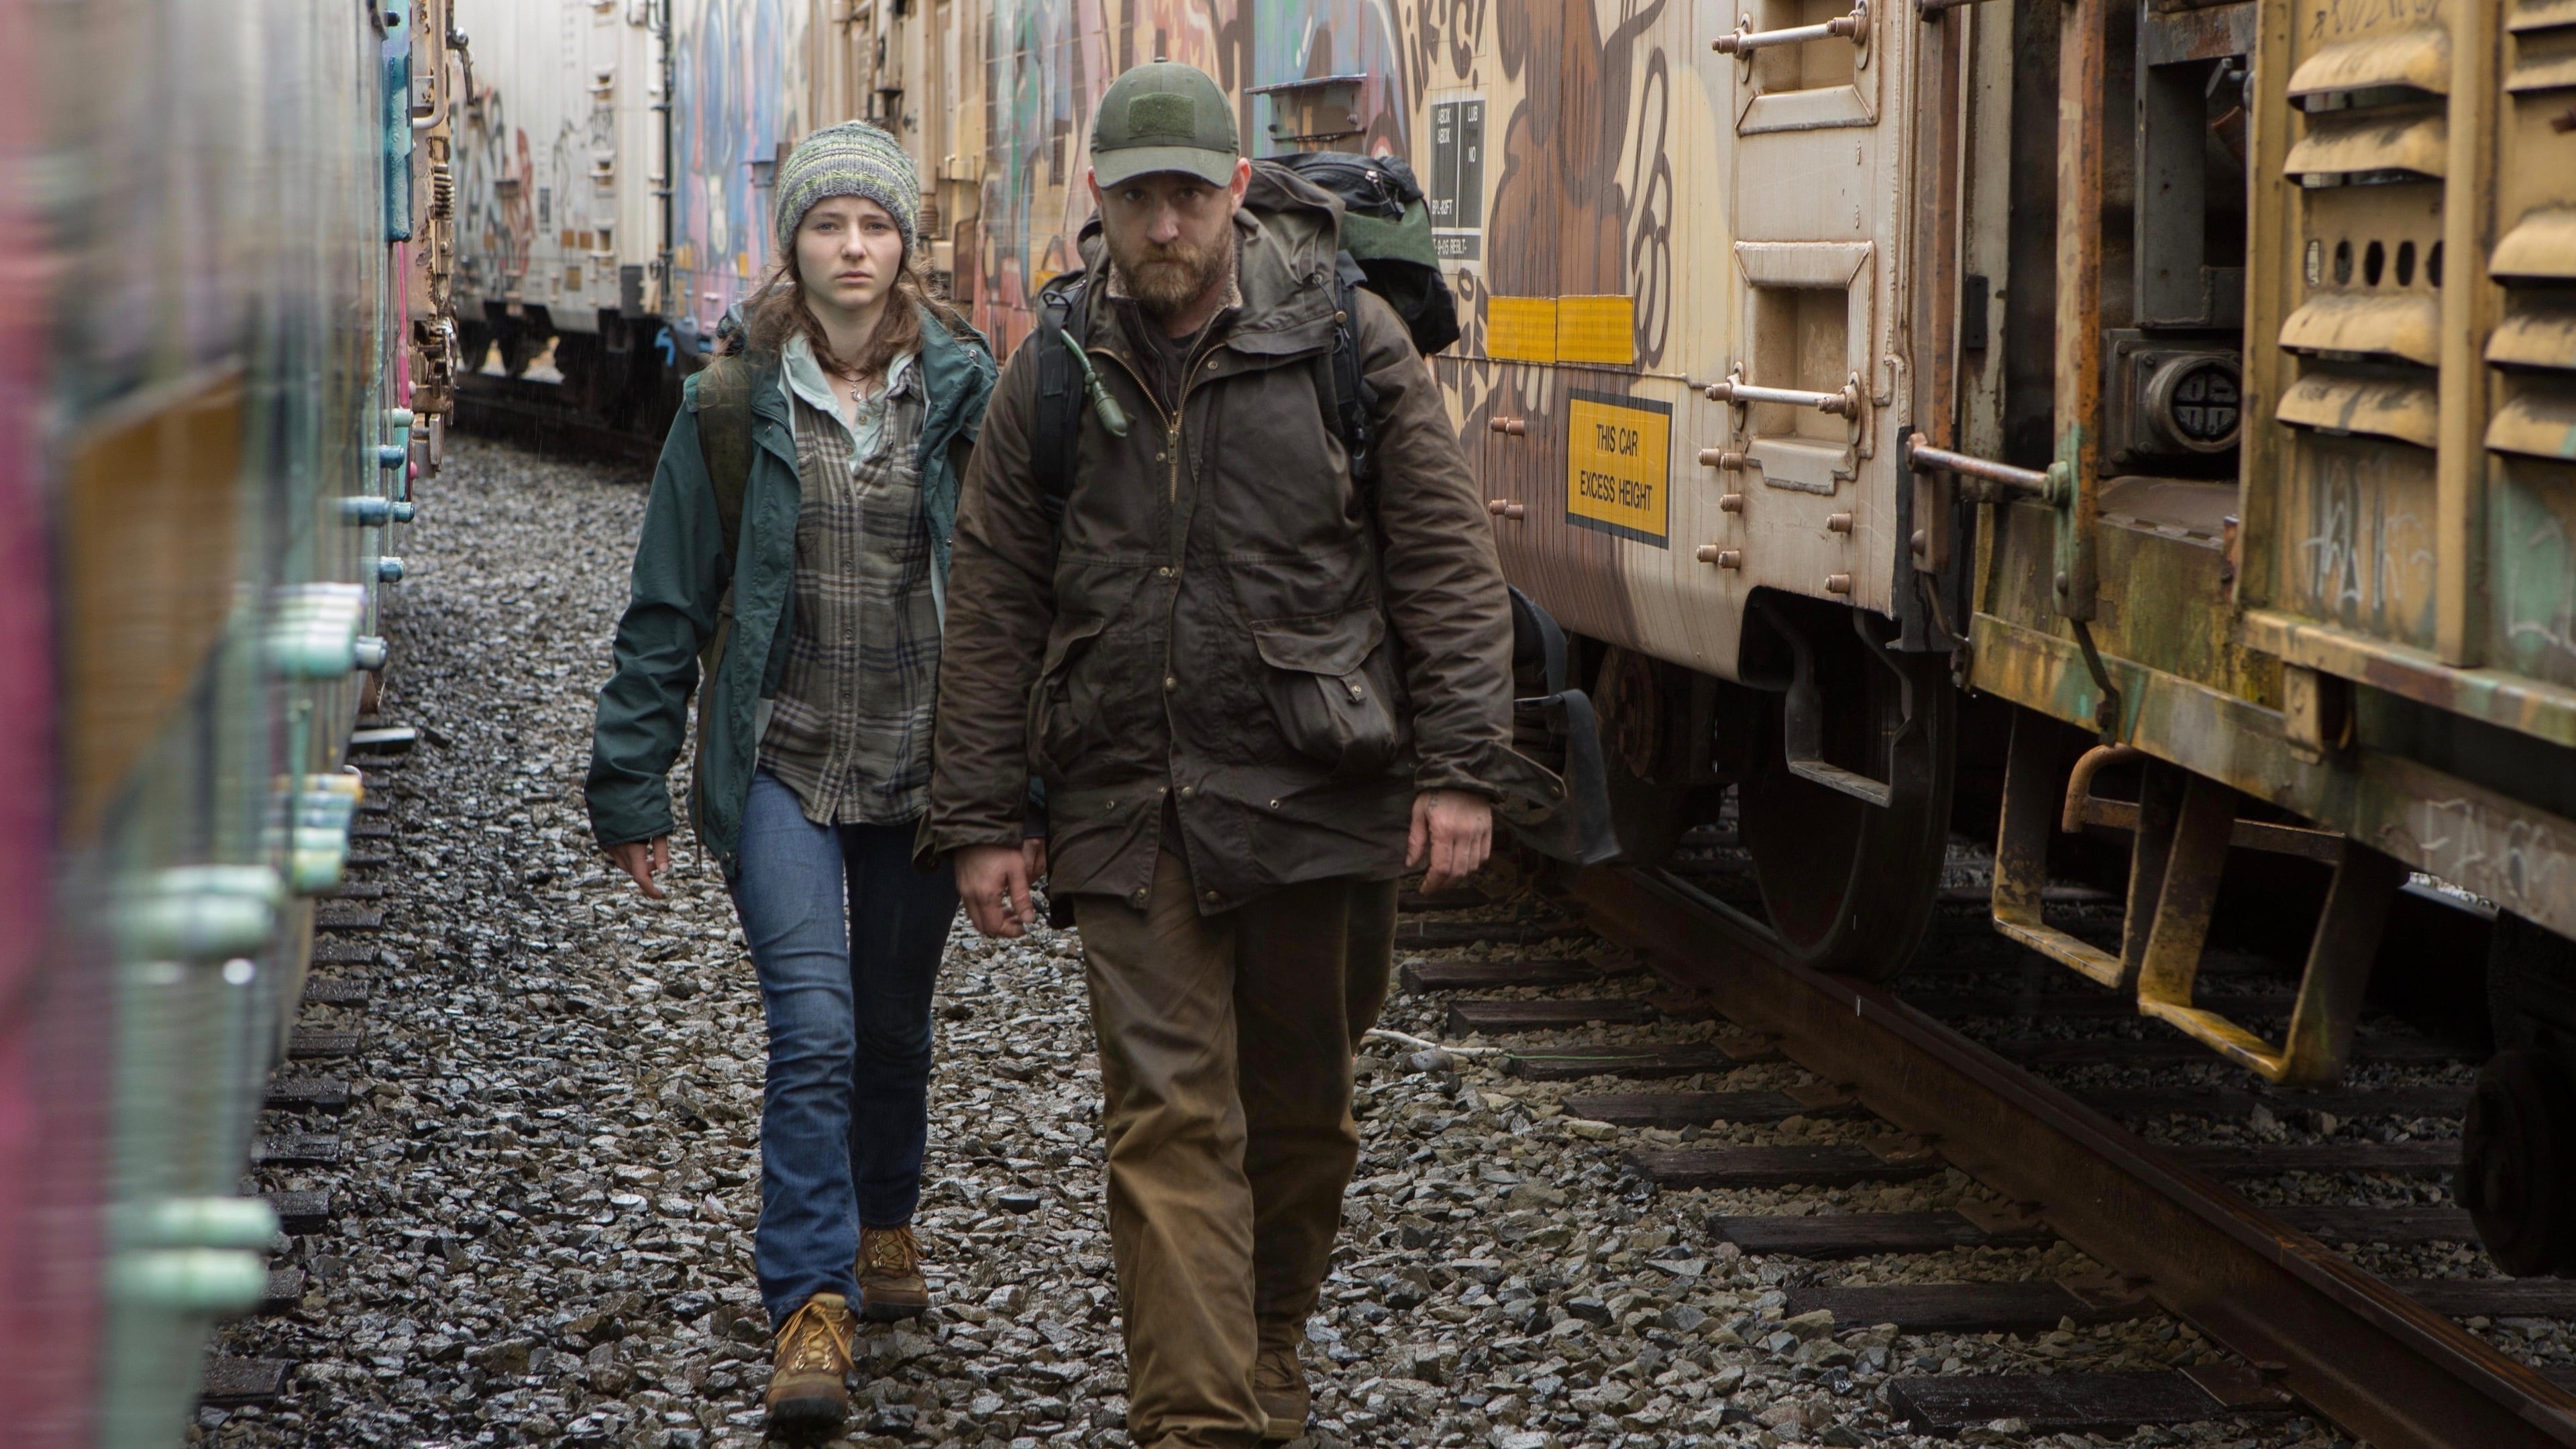 Incluvie movie database, Leave No Trace 2018, Beautifully observed, Father-daughter bond, 3840x2160 4K Desktop